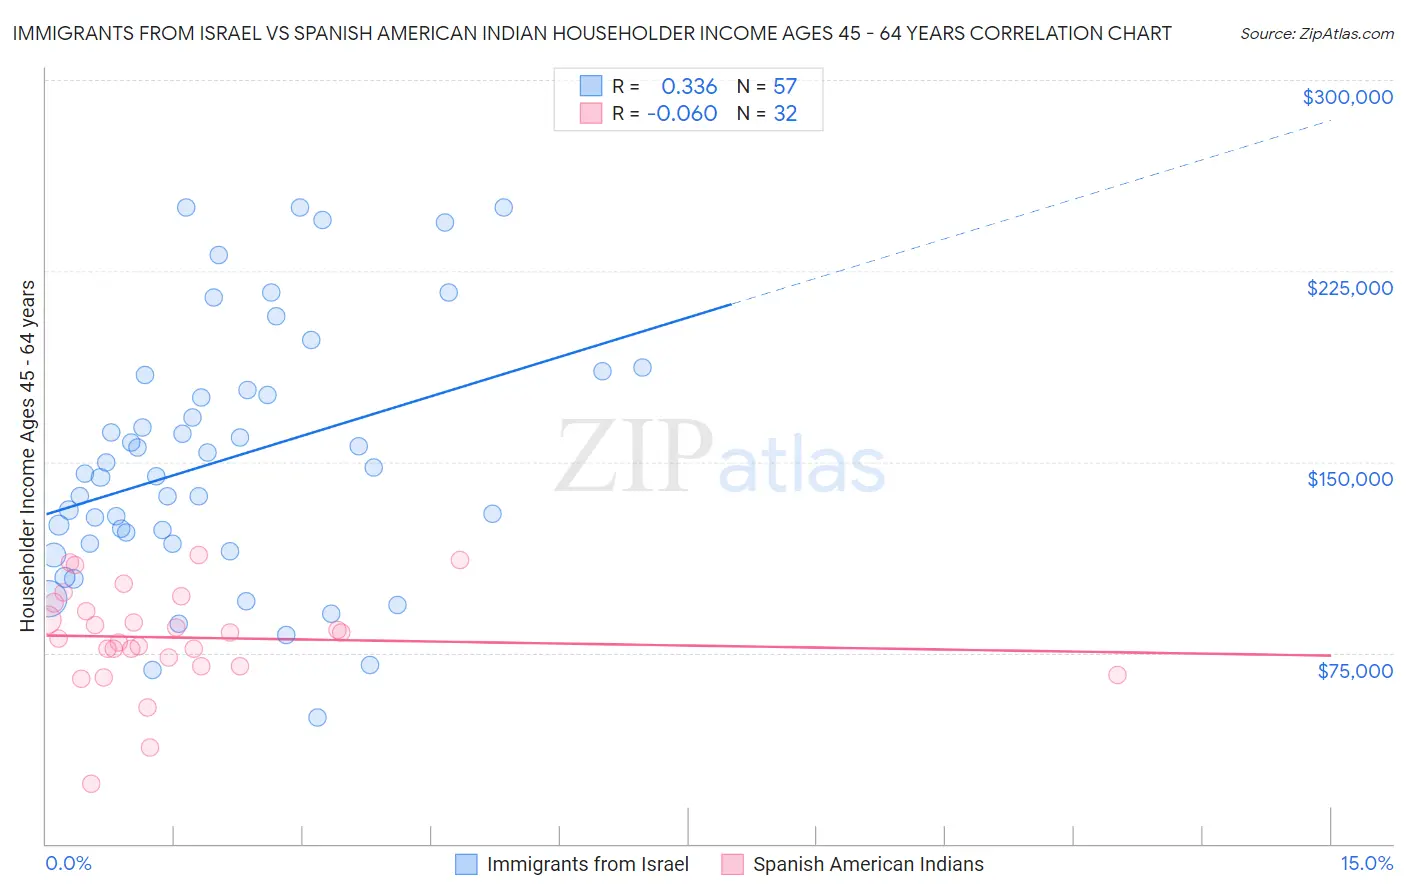 Immigrants from Israel vs Spanish American Indian Householder Income Ages 45 - 64 years